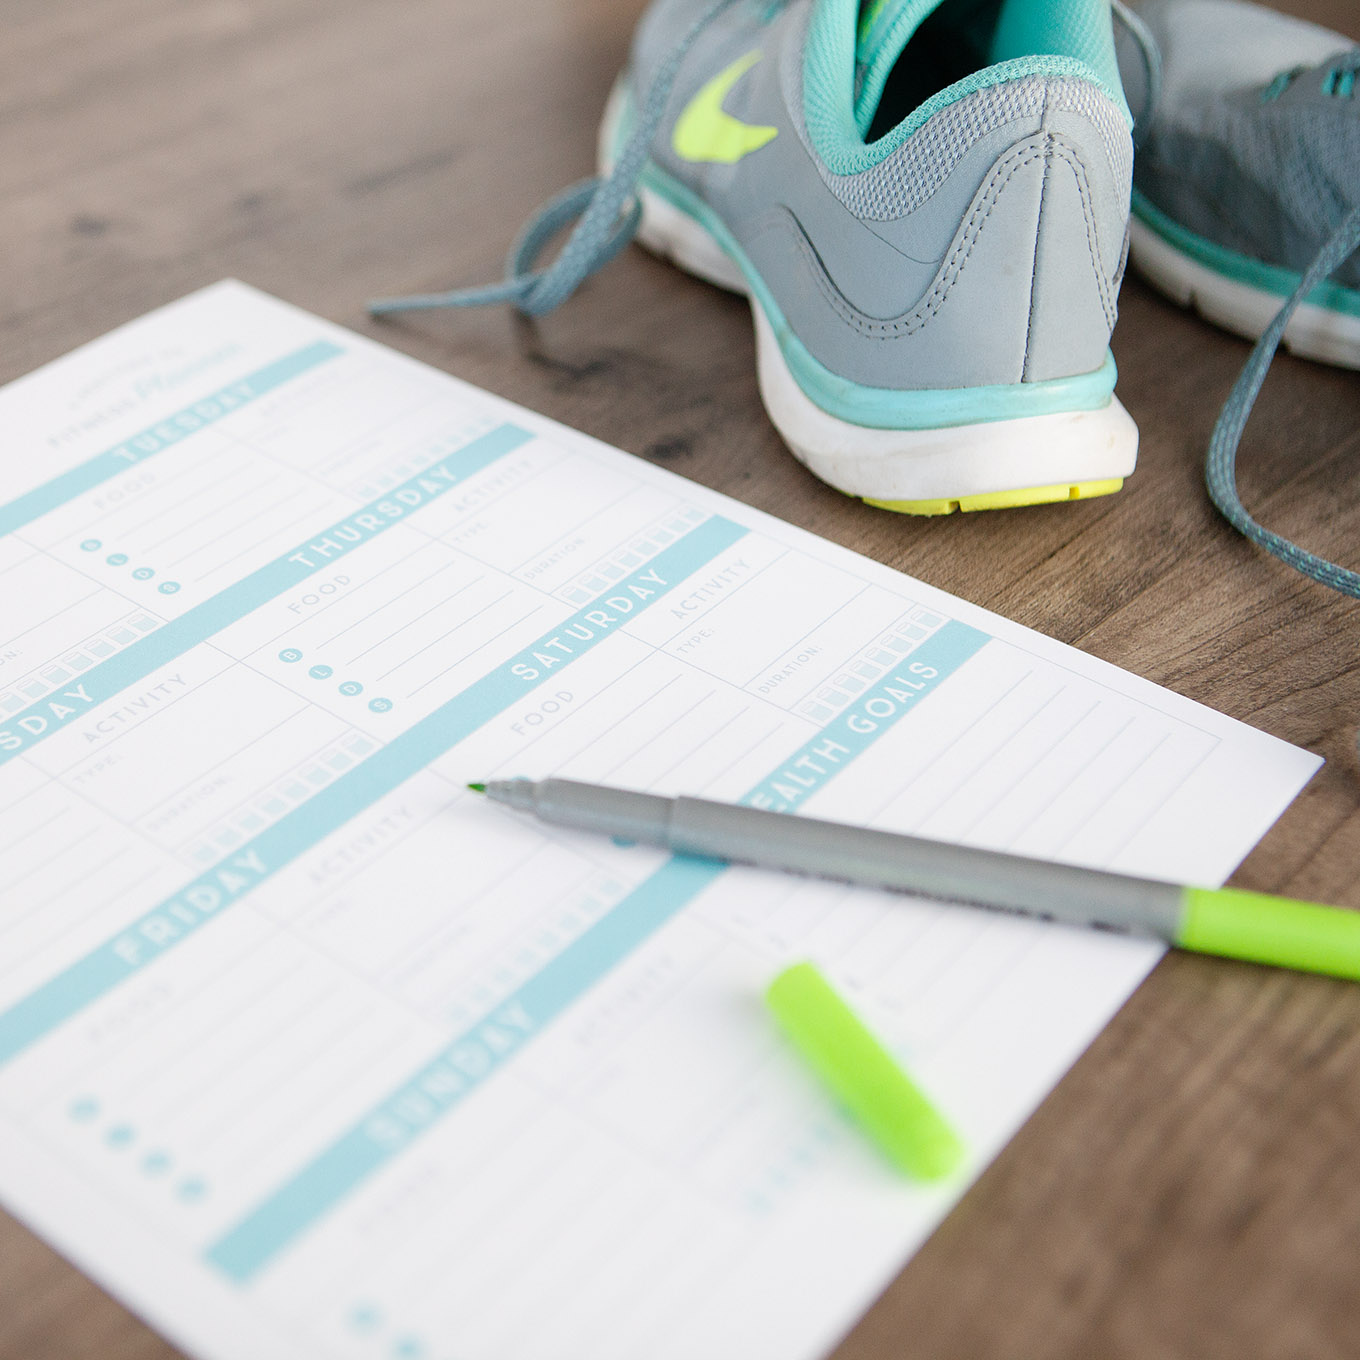 Set yourself up for success and become a healthier "you" with this free printable fitness planner.